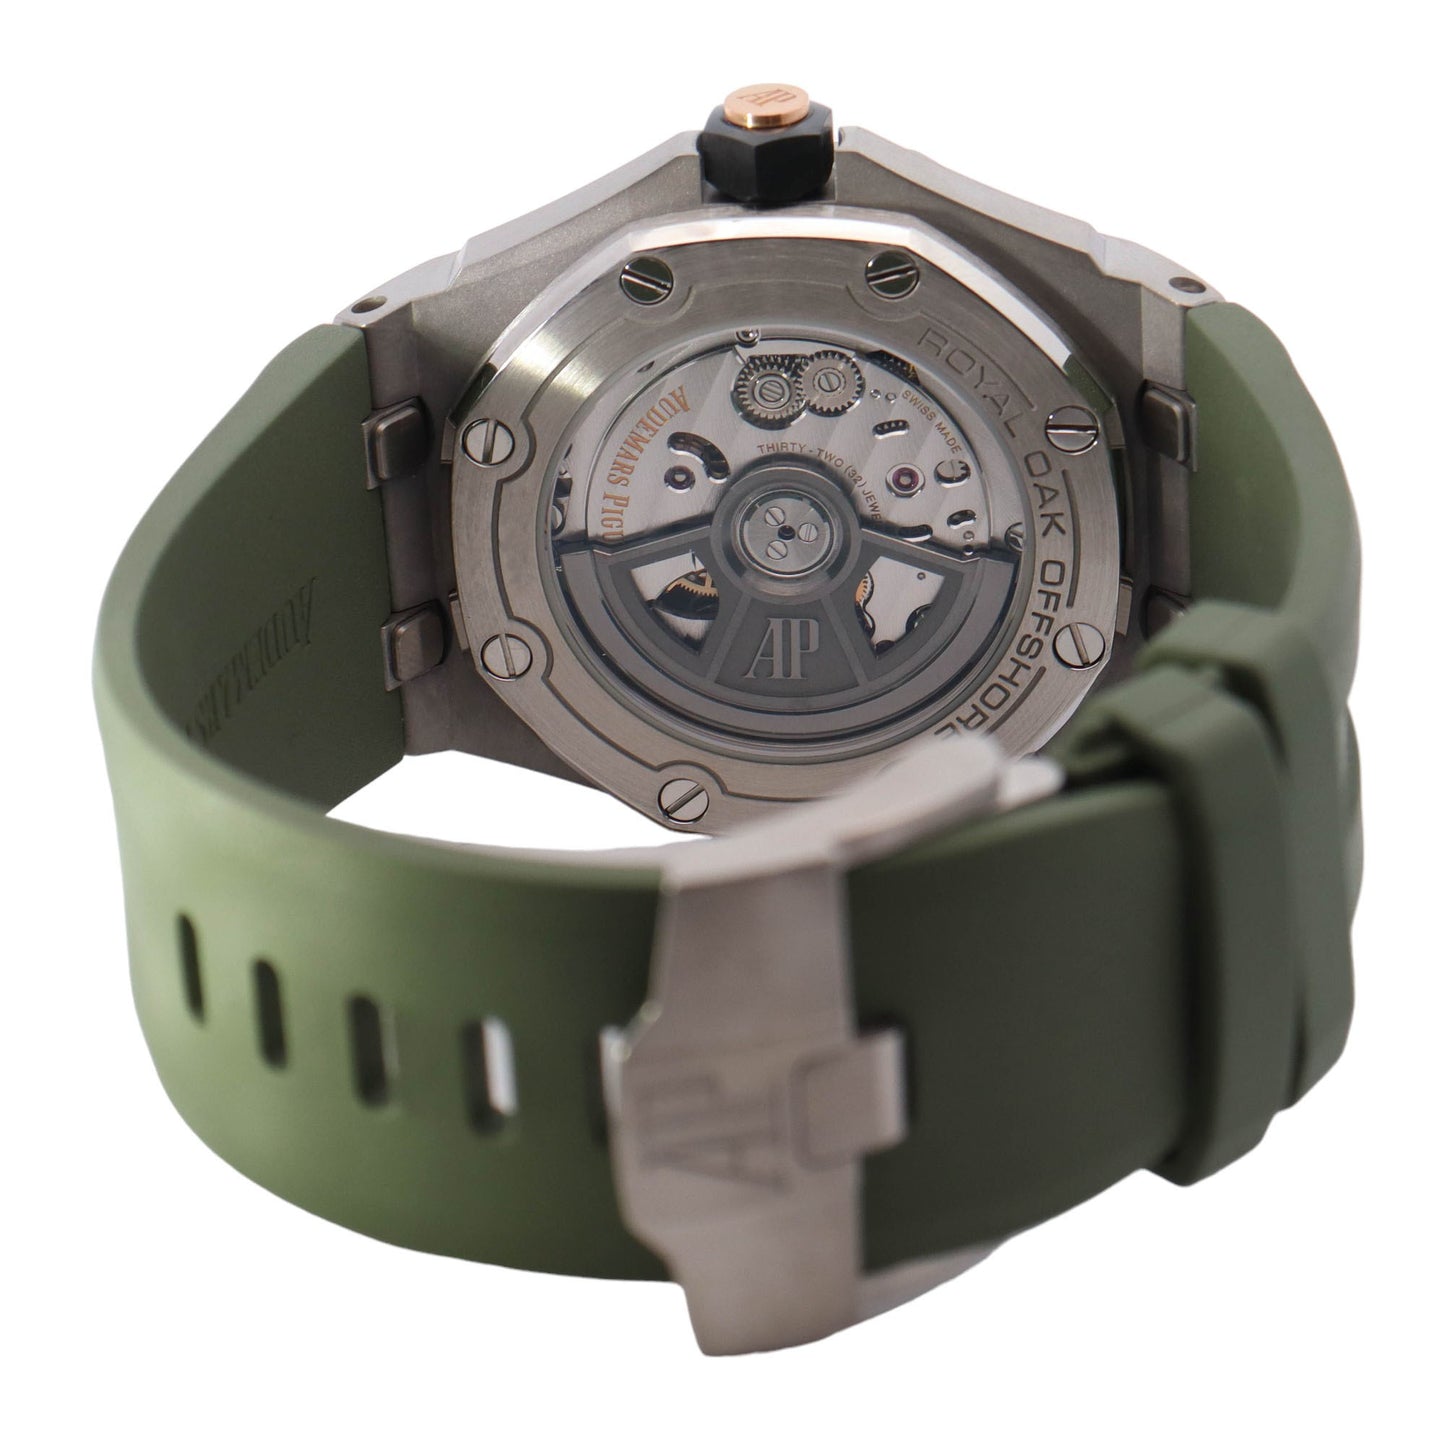 Audemars Piguet Royal Oak Offshore Diver Stainless Steel 42mm Green Dot Dial Watch Reference# 15720ST.OO.A052CA.01 - Happy Jewelers Fine Jewelry Lifetime Warranty